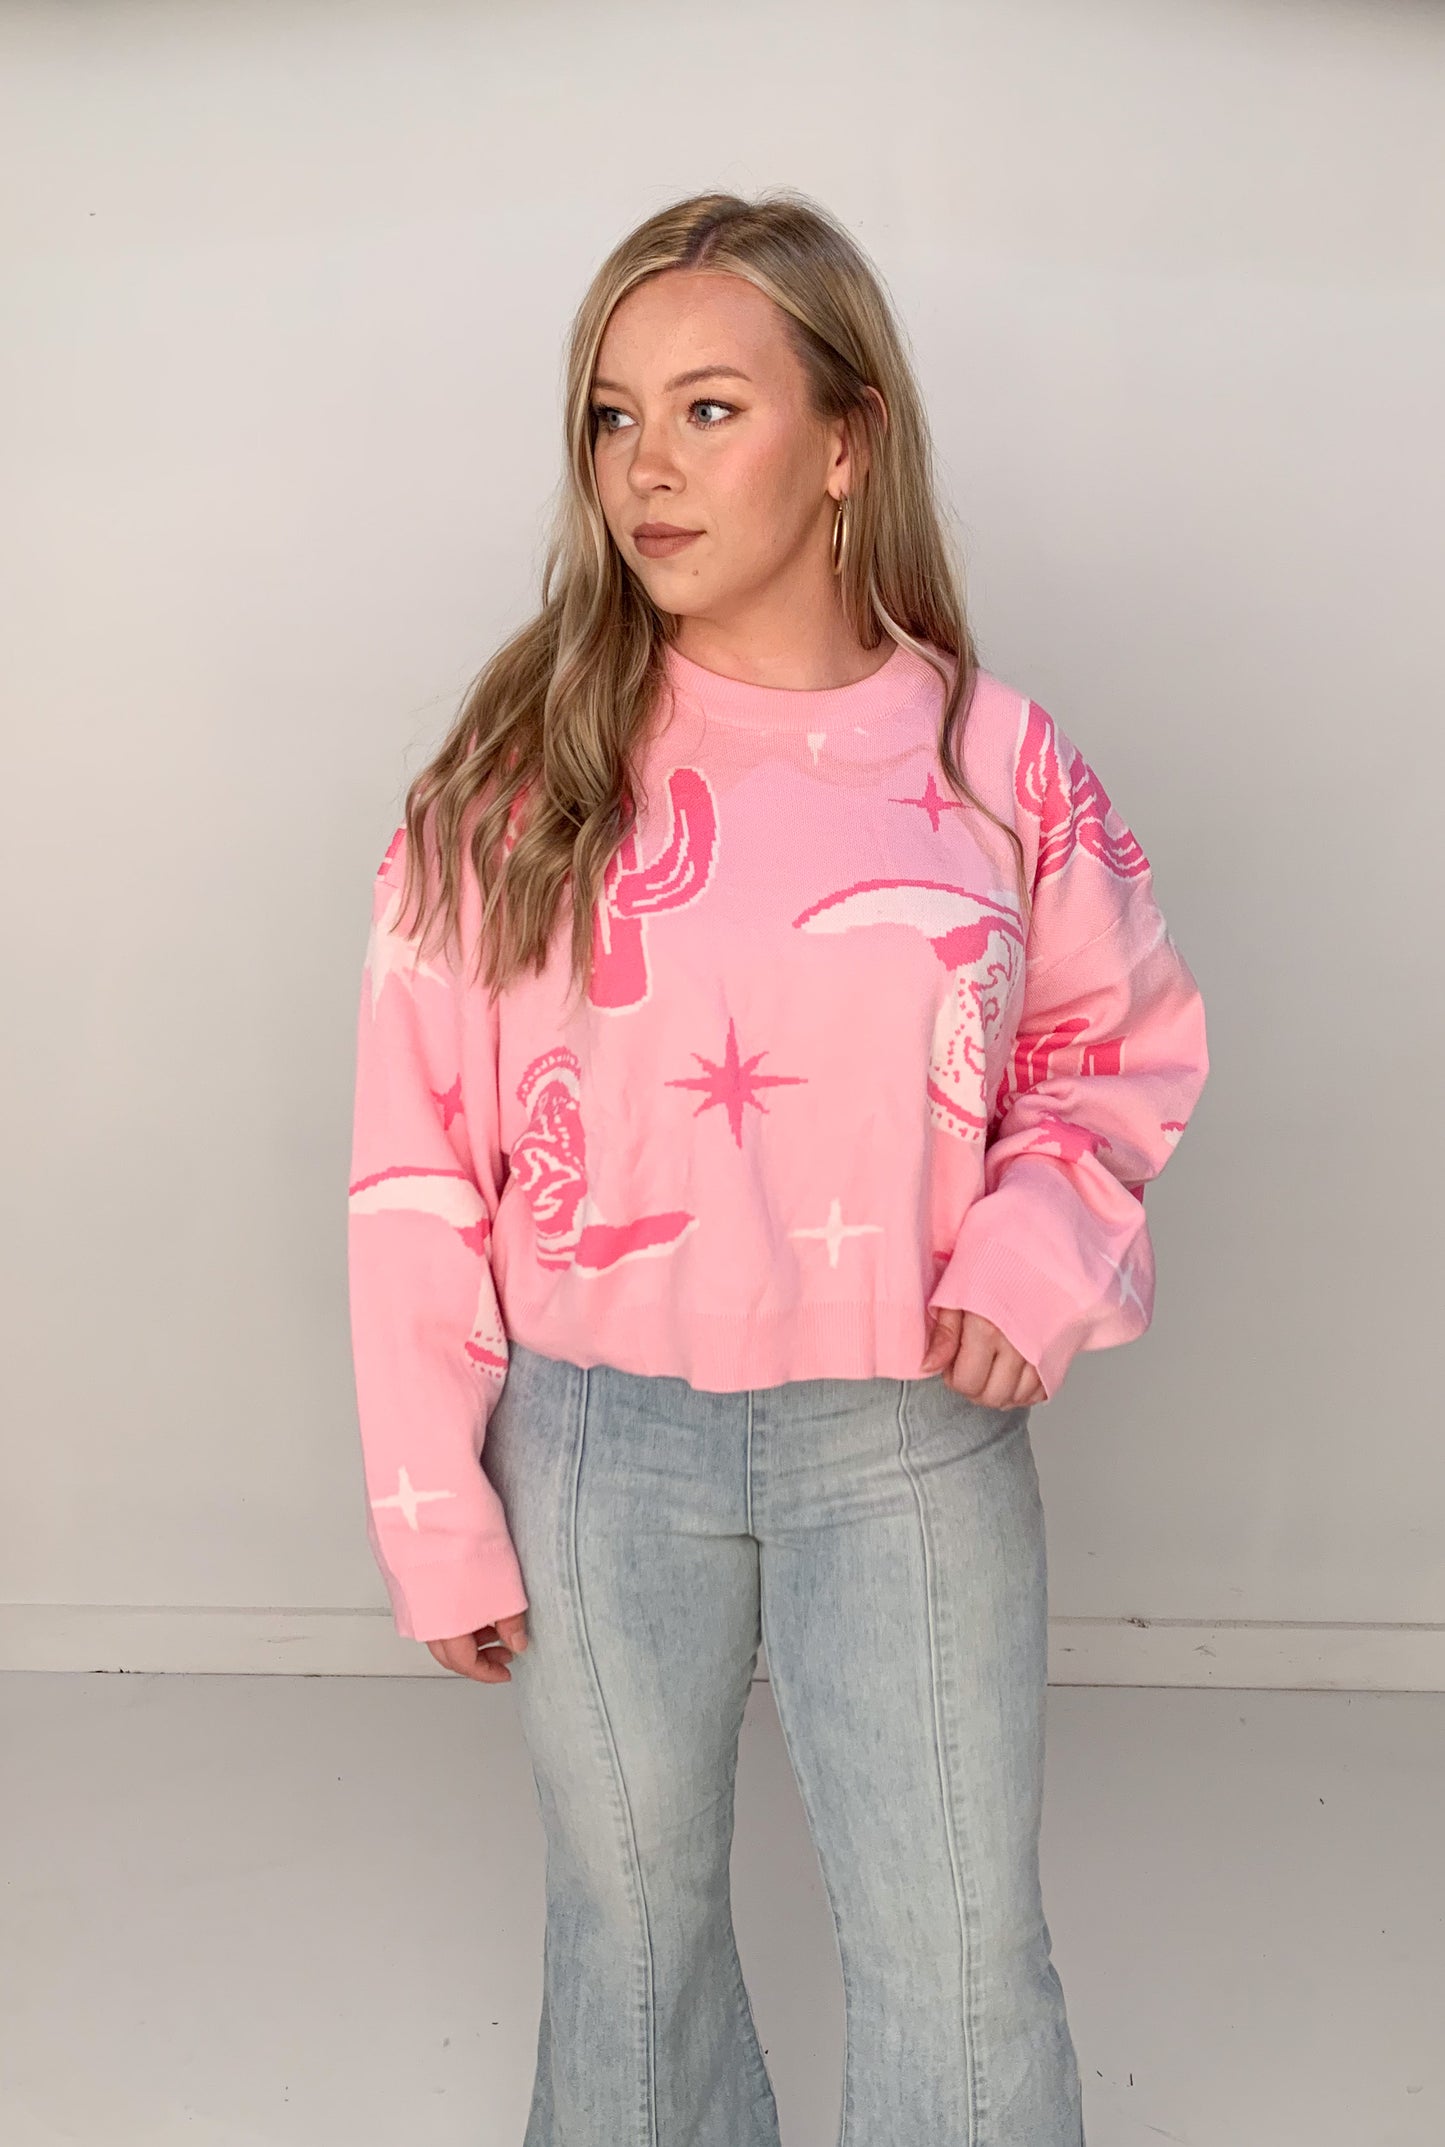 Boot Scootin' Boogie Sweater, Pink